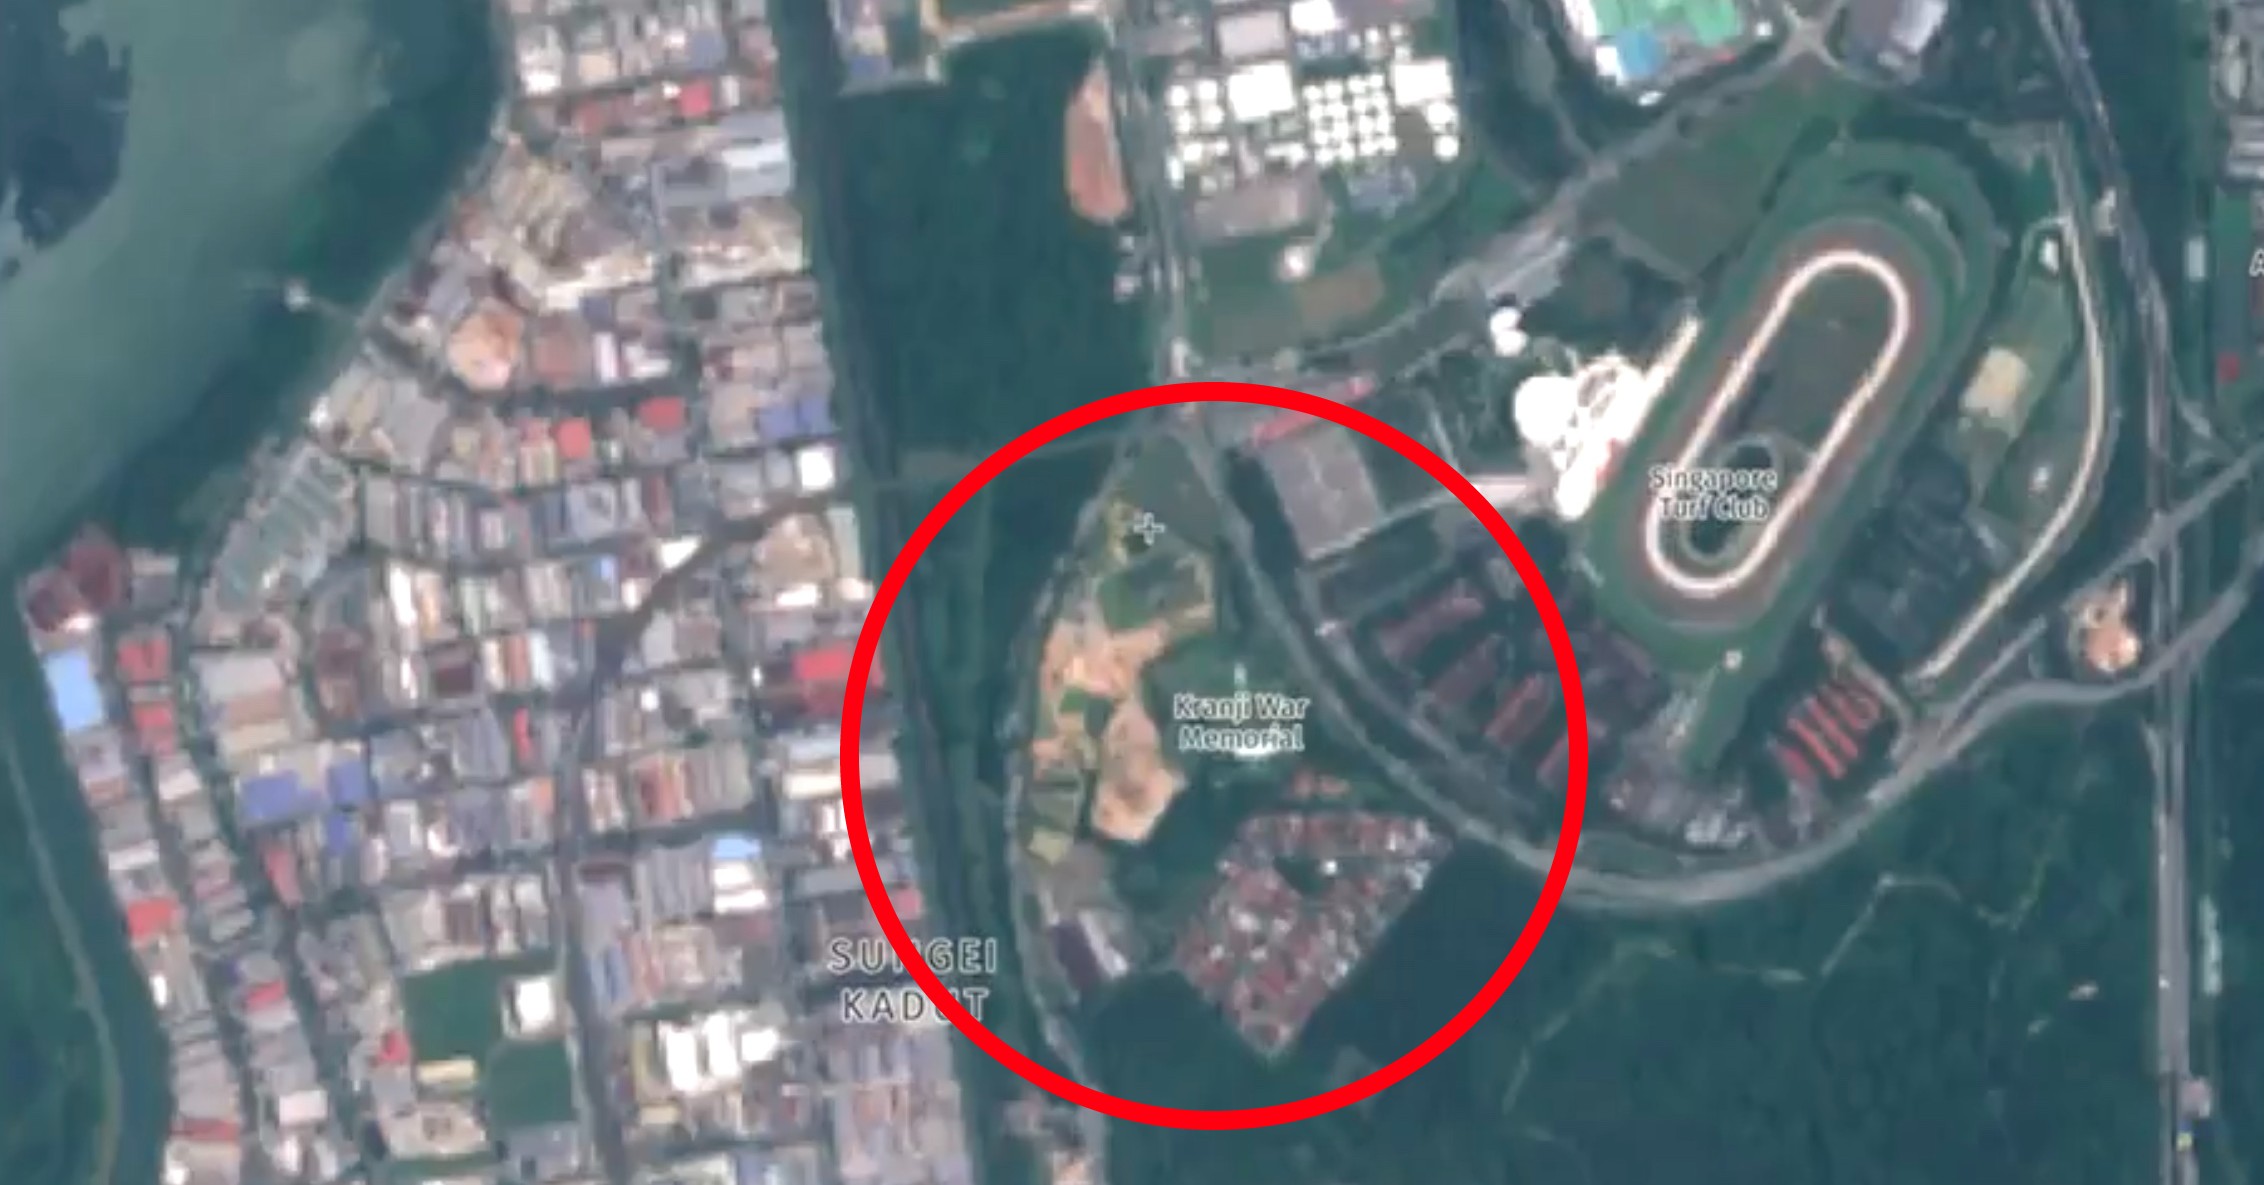 Satellite image shows the Kranji woodland cleared in March 2020. Original image: Lim_Jialiang/Twitter